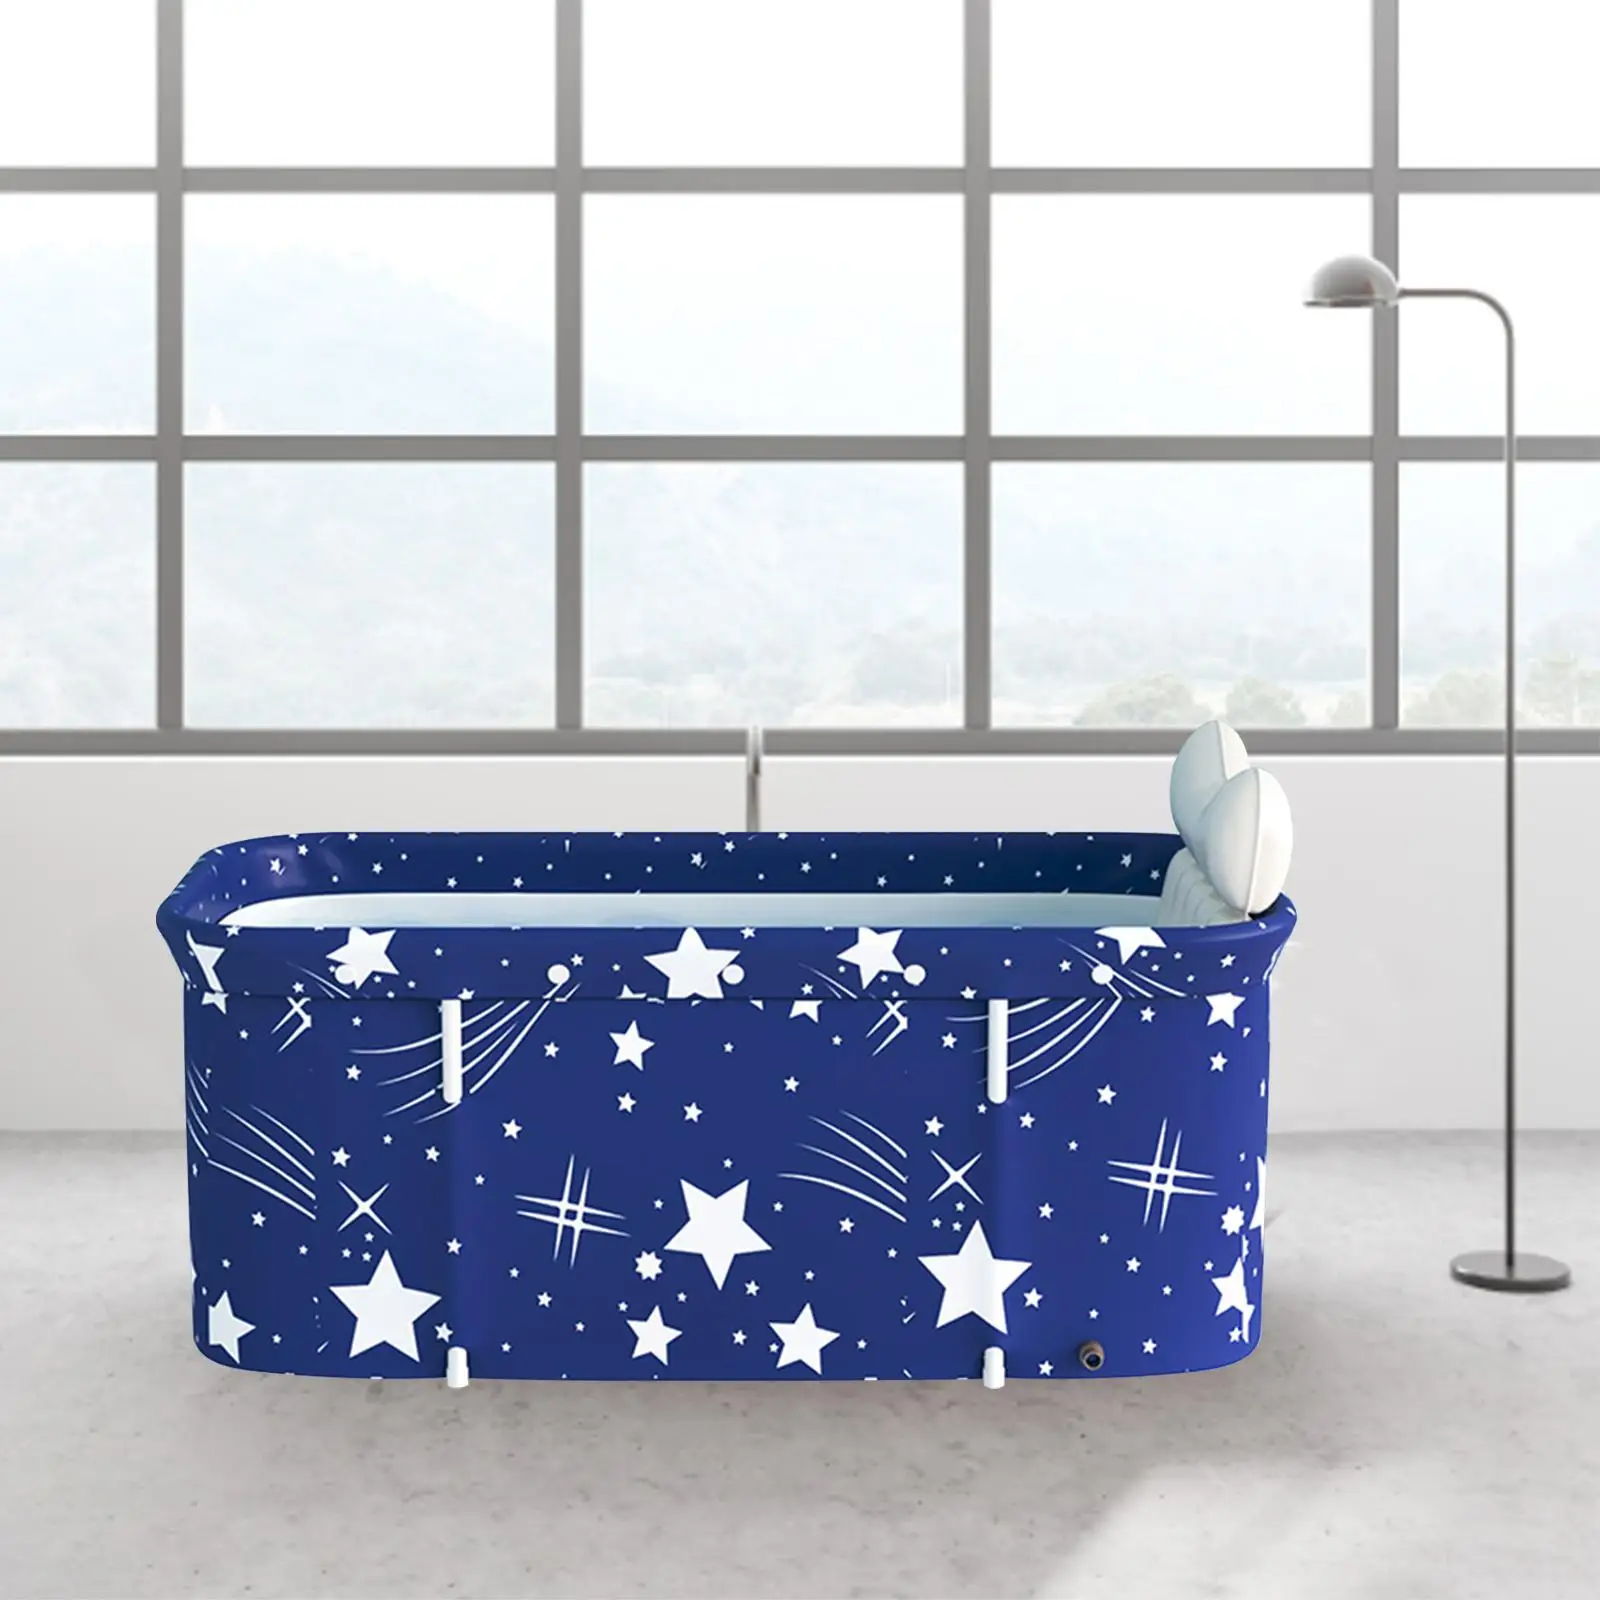 Foldable Soaking Standing Bath Tub Seat Cushion Easy to Install for Family